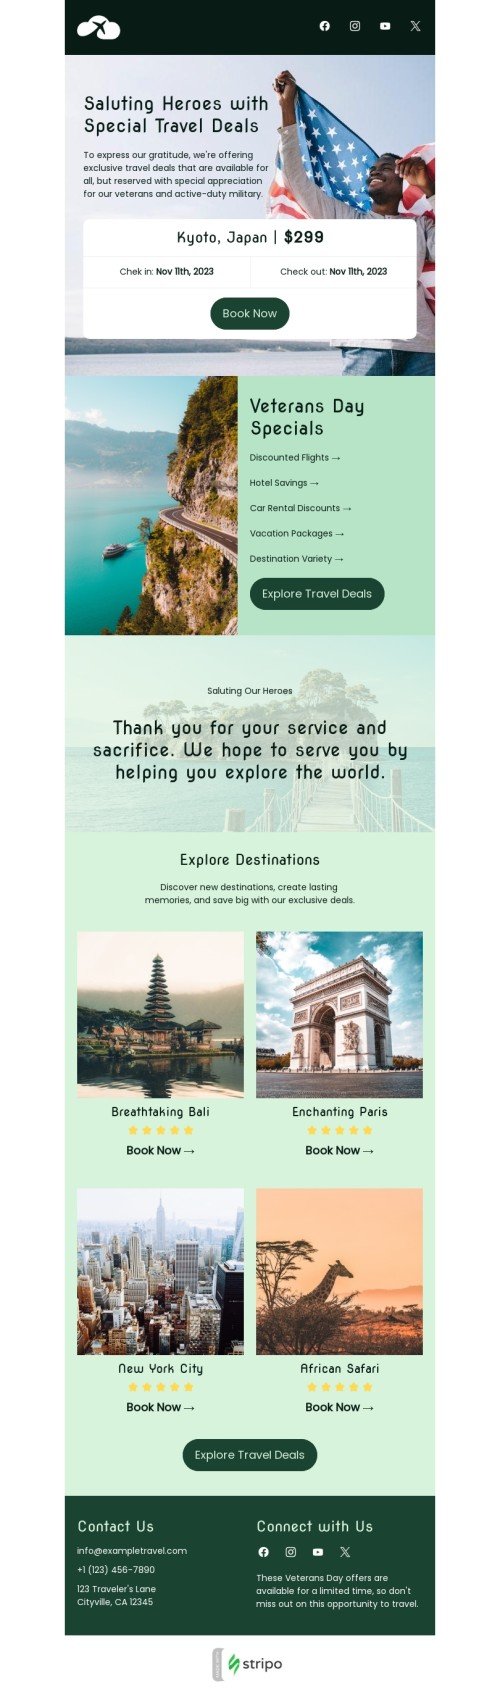 Veterans Day email template "Saluting heroes" for travel industry mobile view